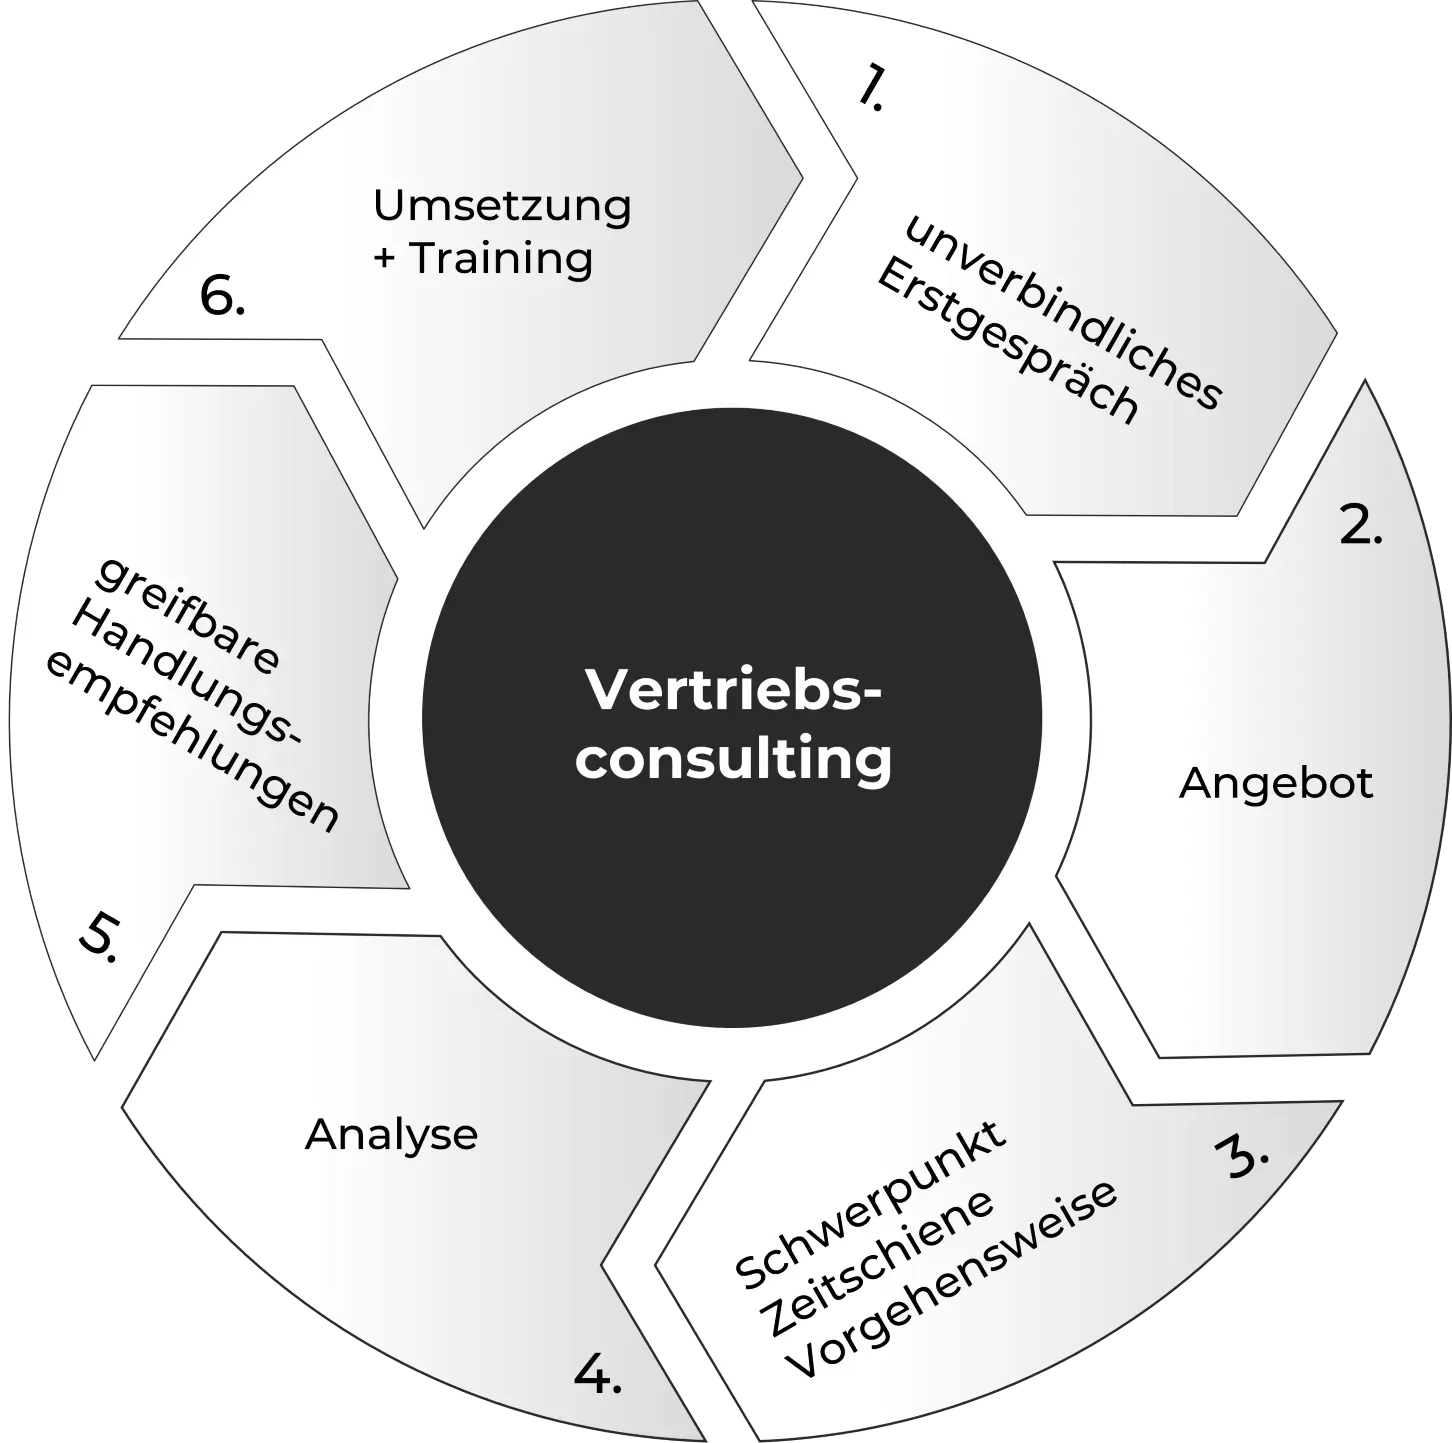 Vertriebsconsulting